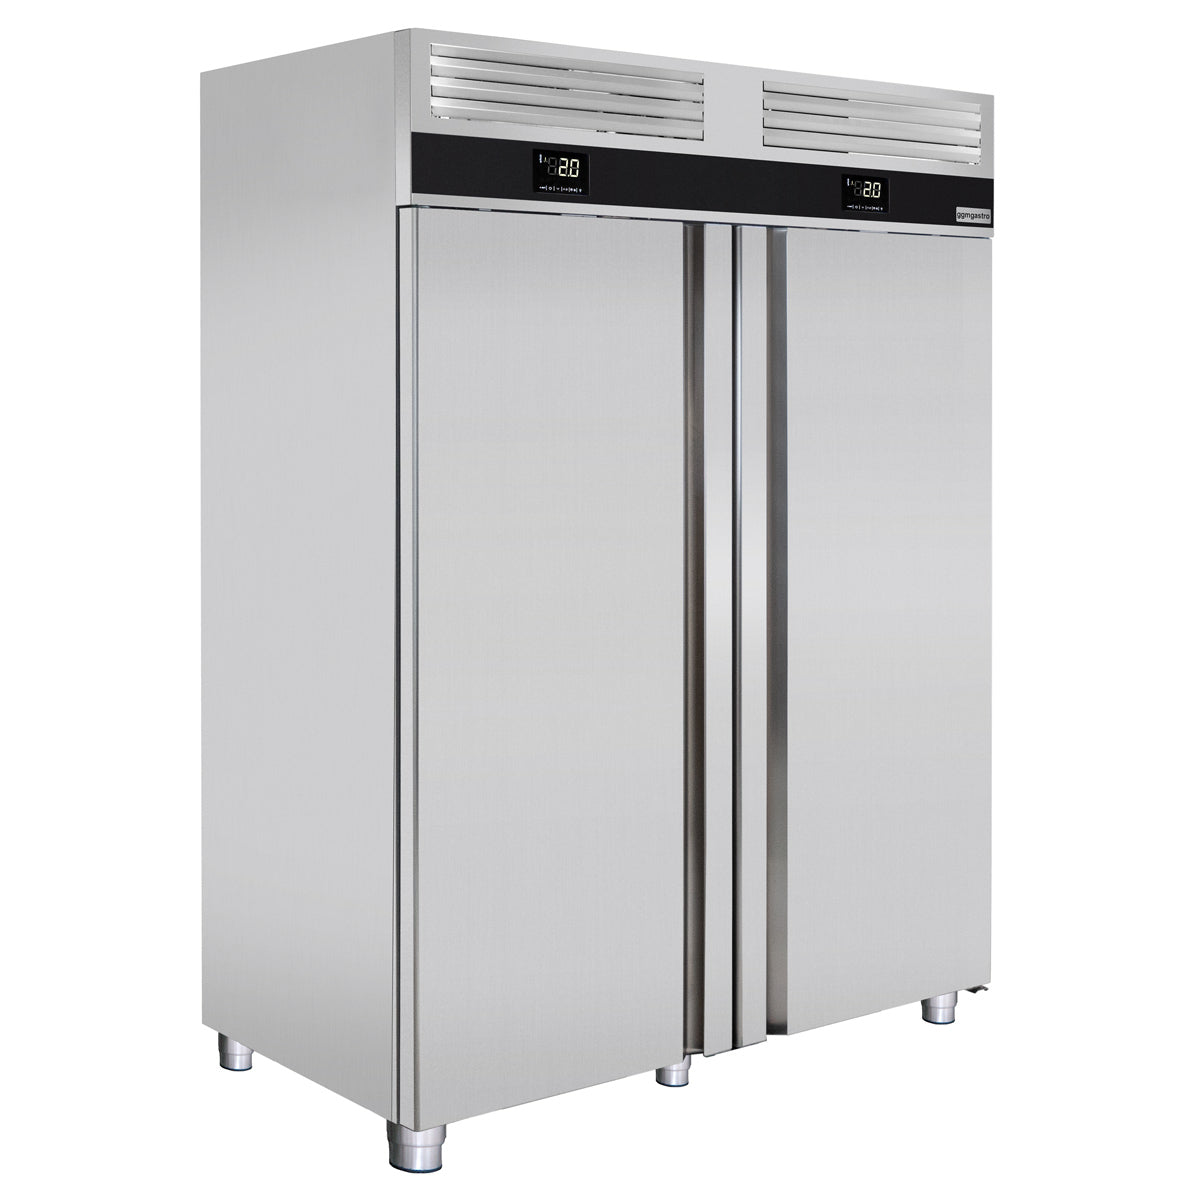 Refrigerator and freezer combination - 1.4 x 0.81 m - 1400 liters - with 2 doors